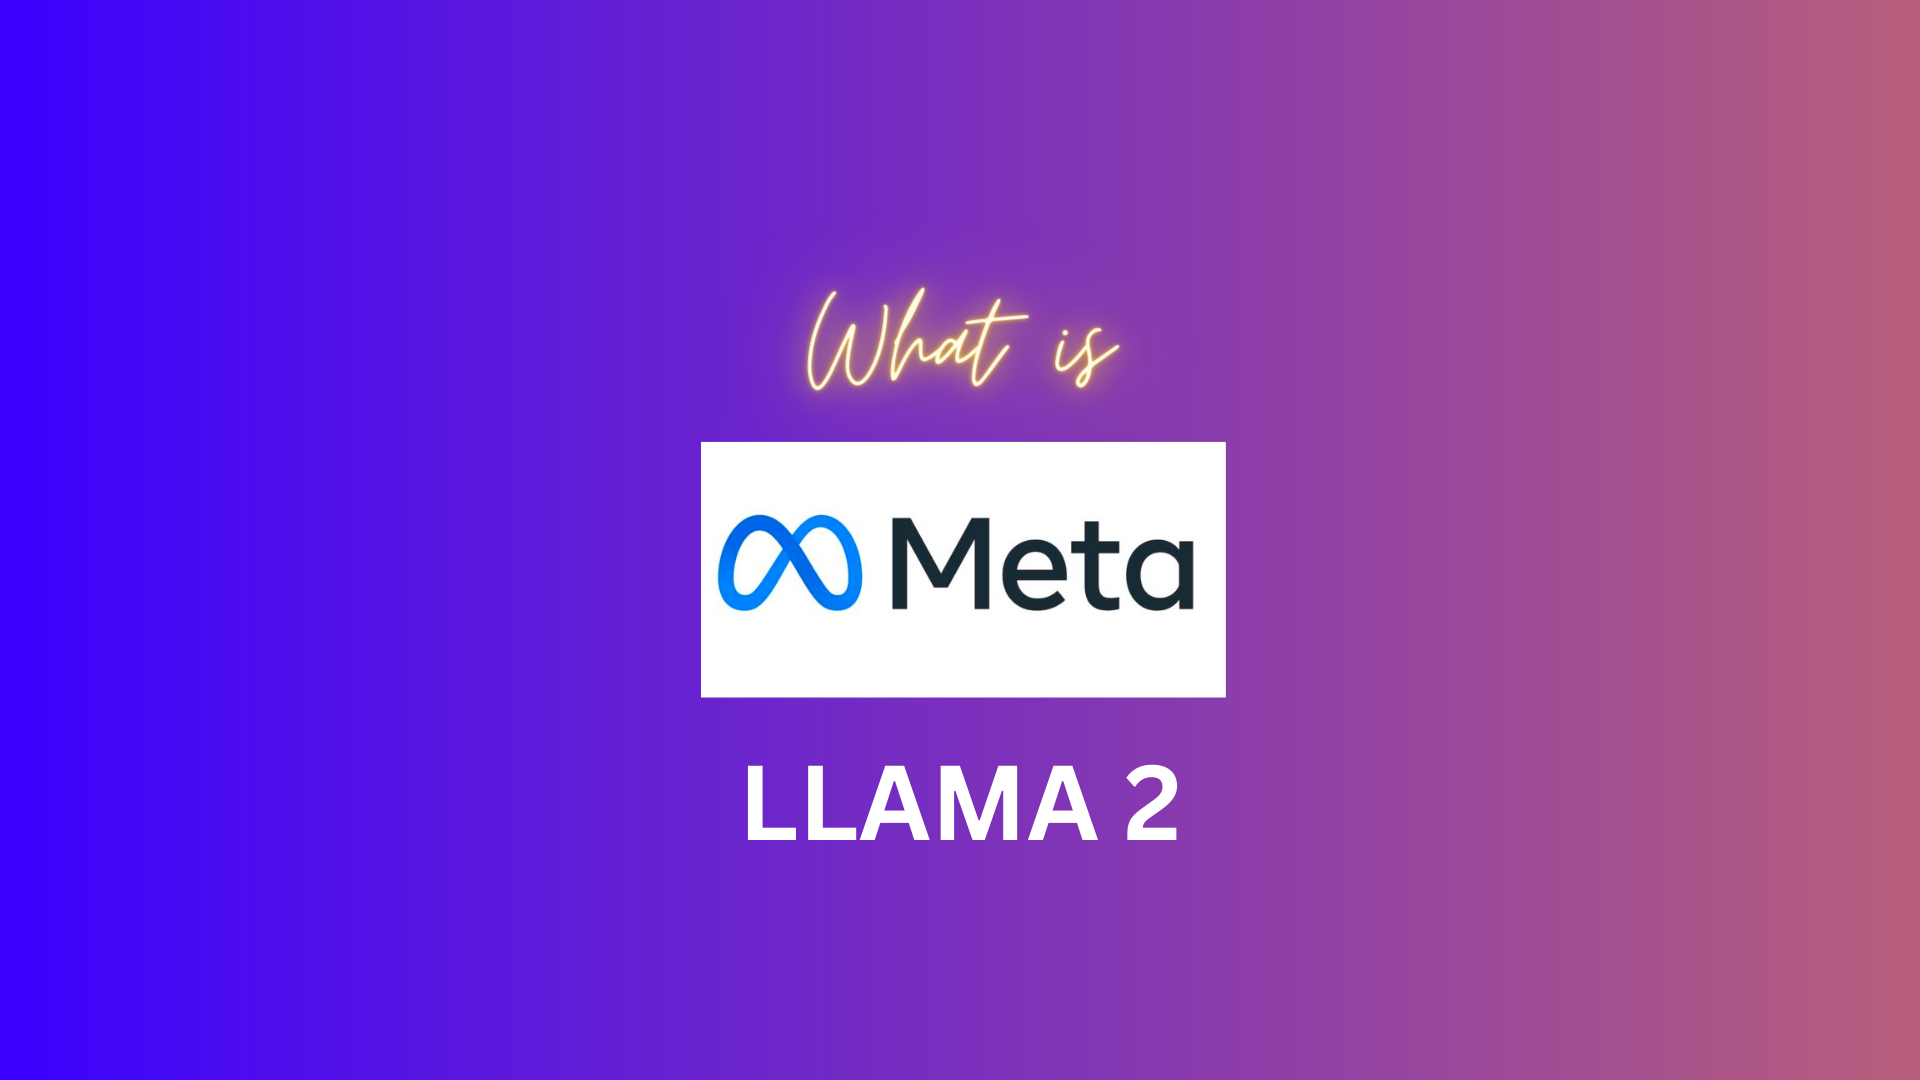 What is Llama 2, with meta logo, on a blended blue and purple background.